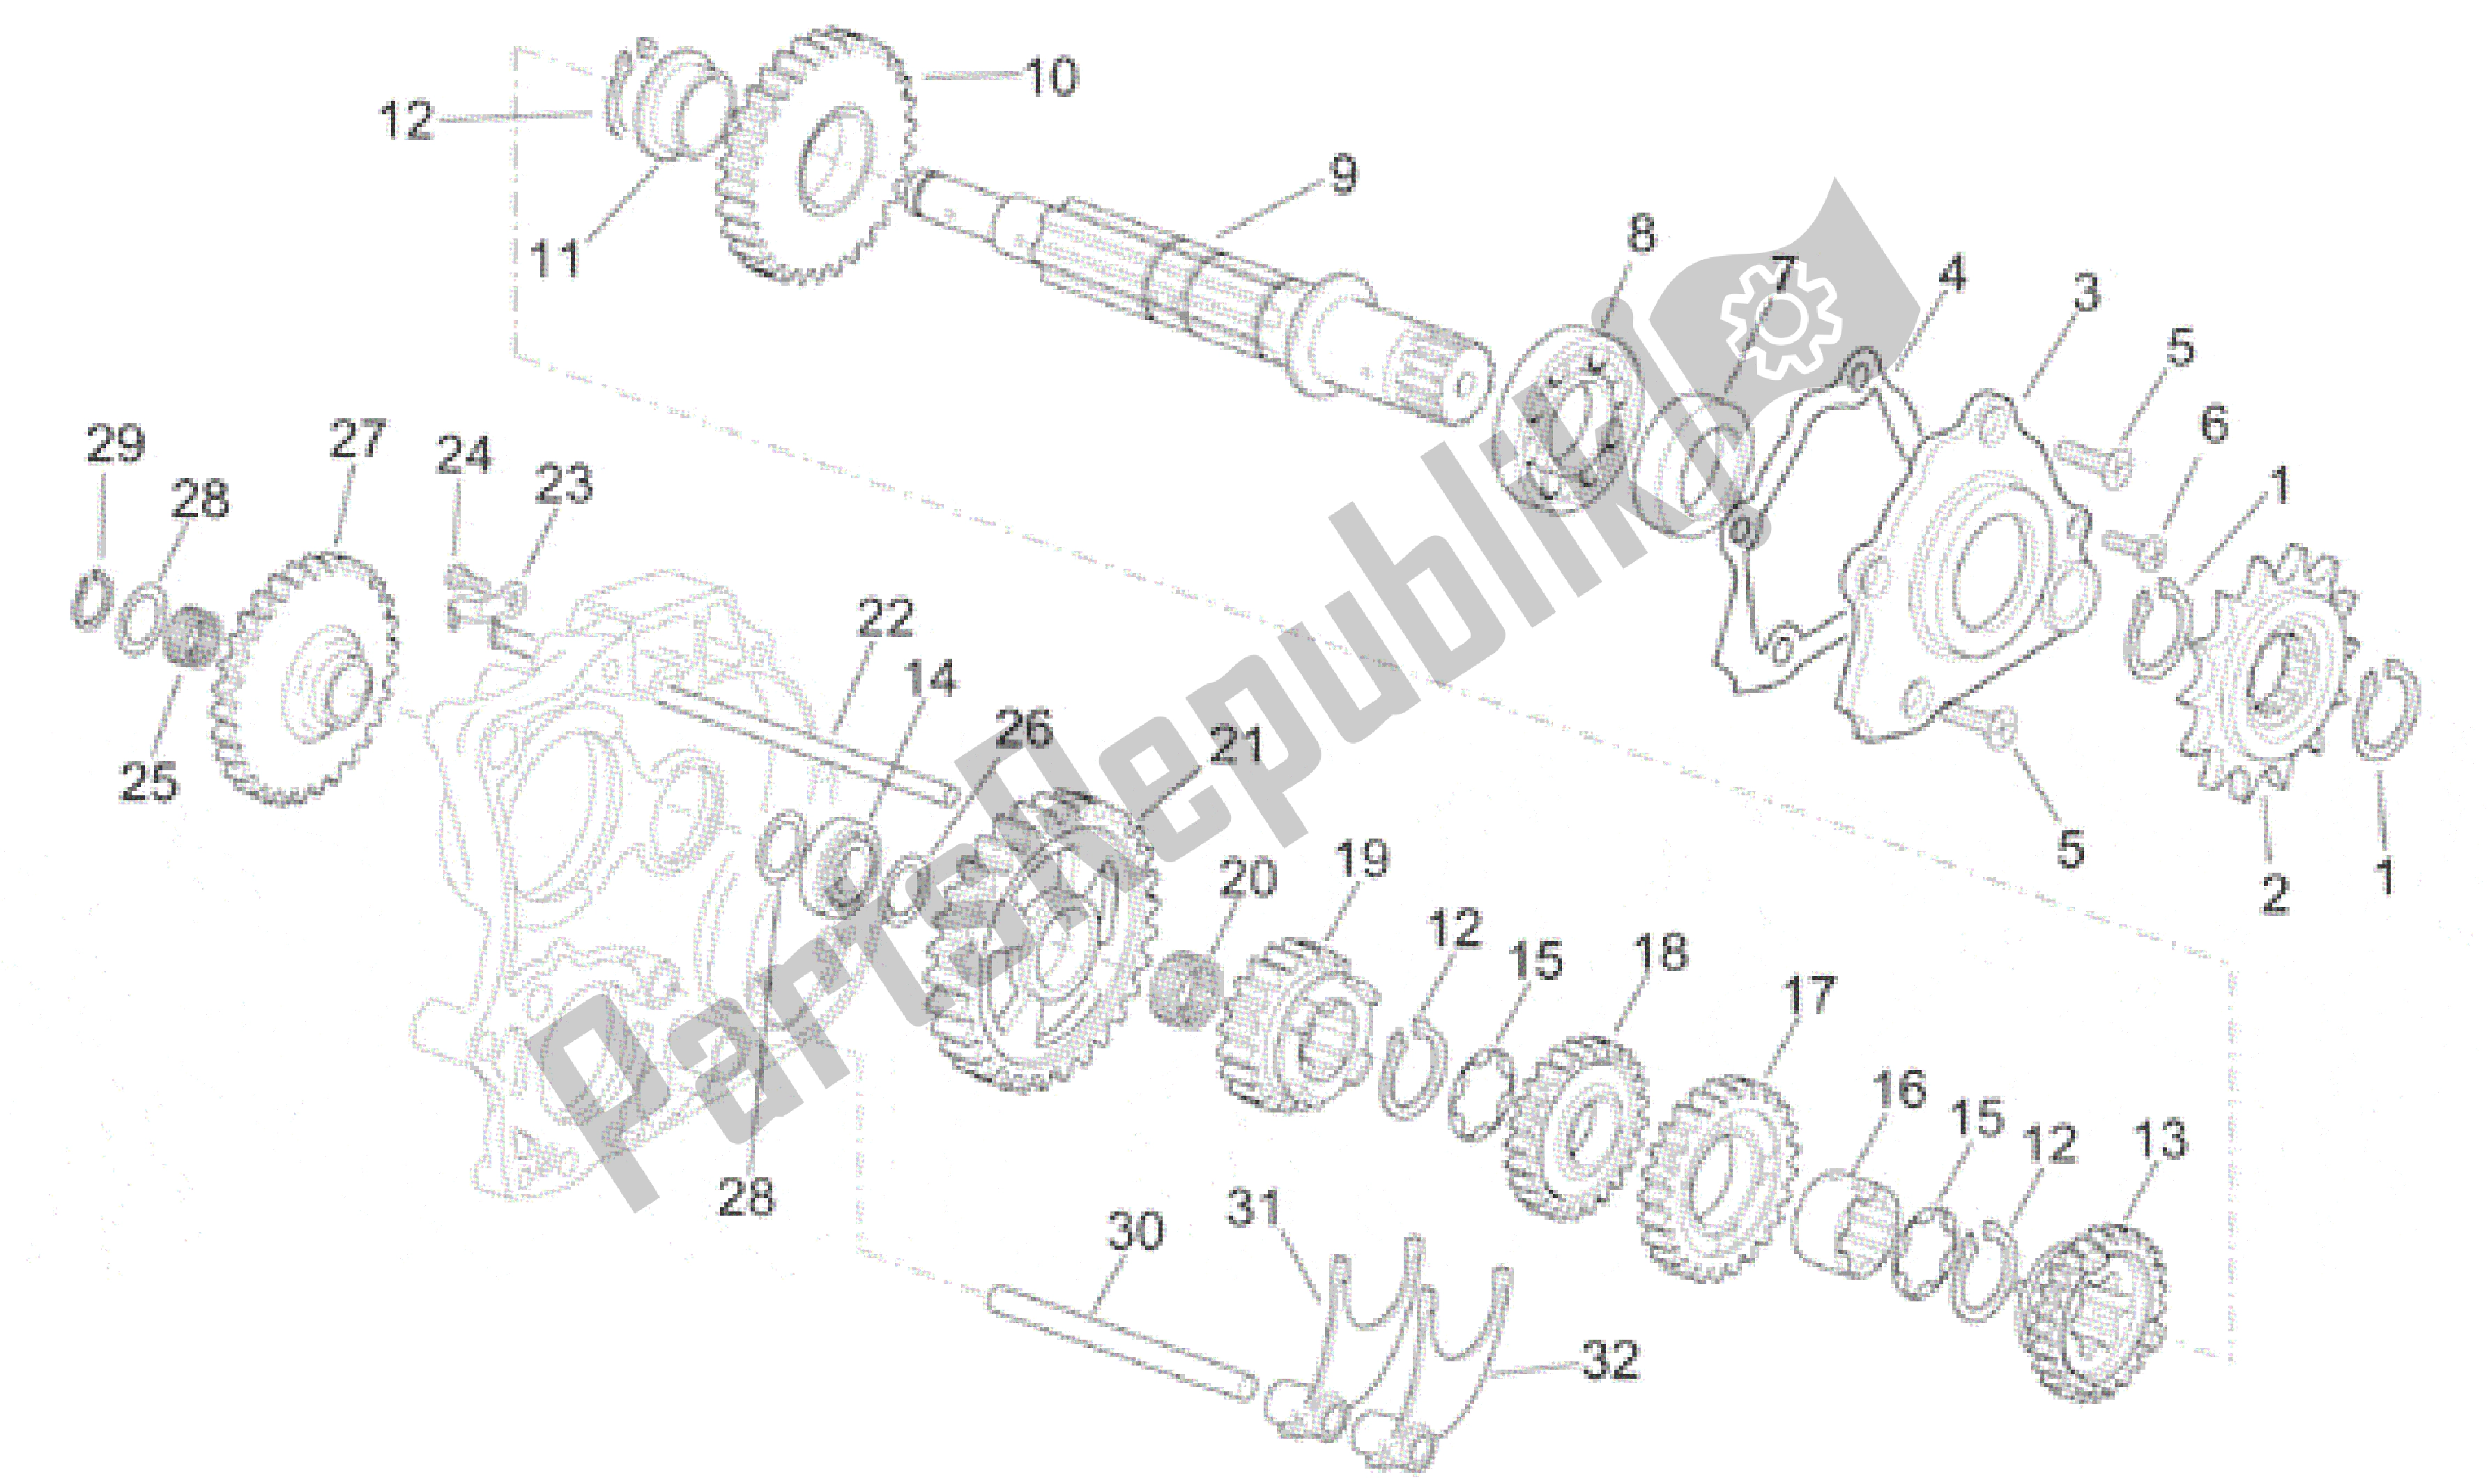 All parts for the Driven Shaft of the Aprilia RS 250 1998 - 2001